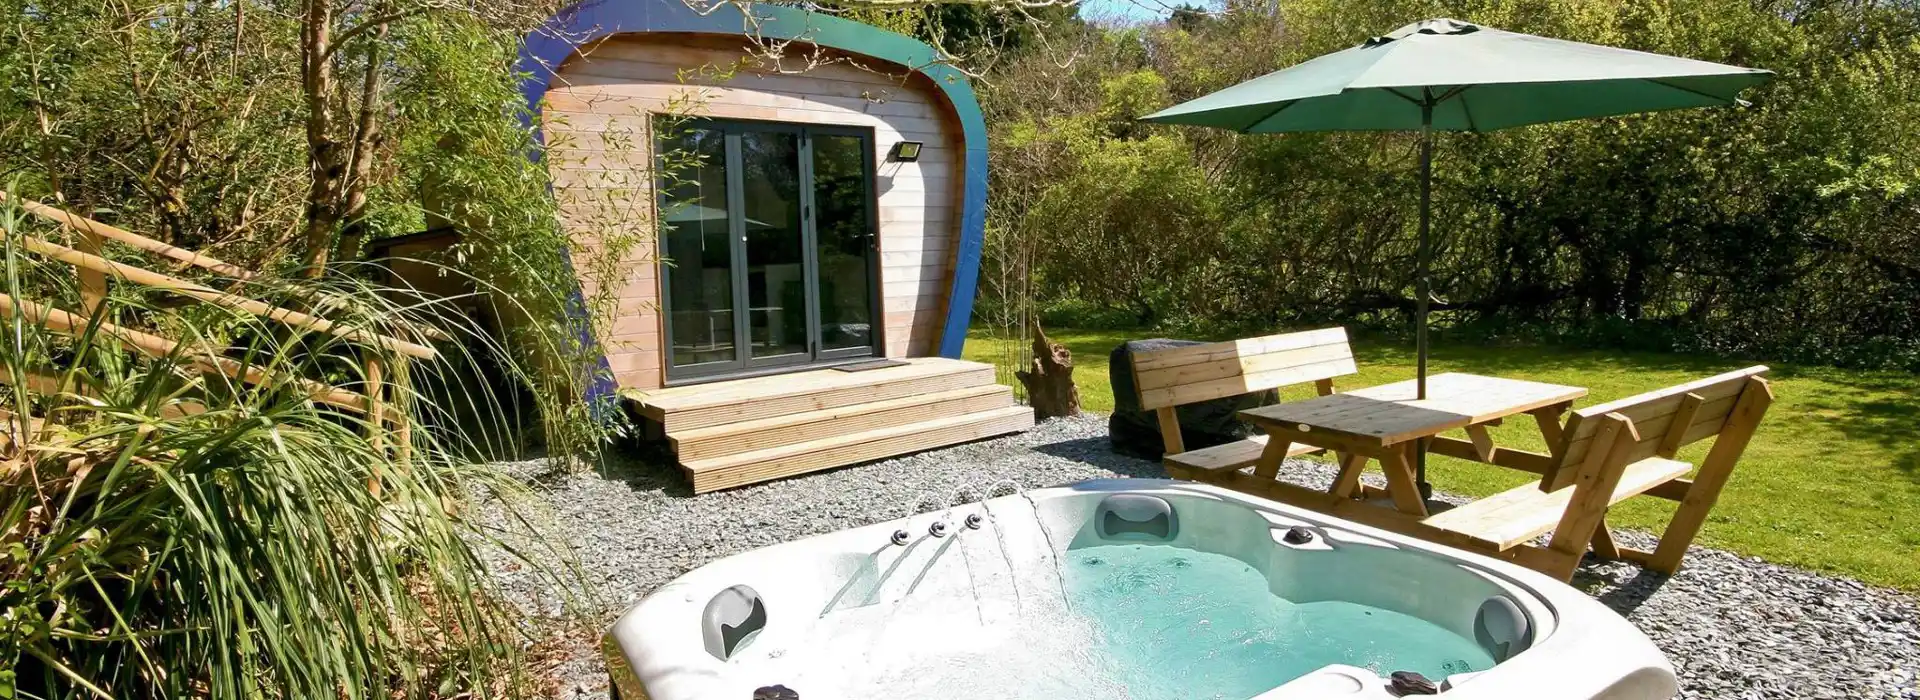 Glamping with hot tubs in Devon